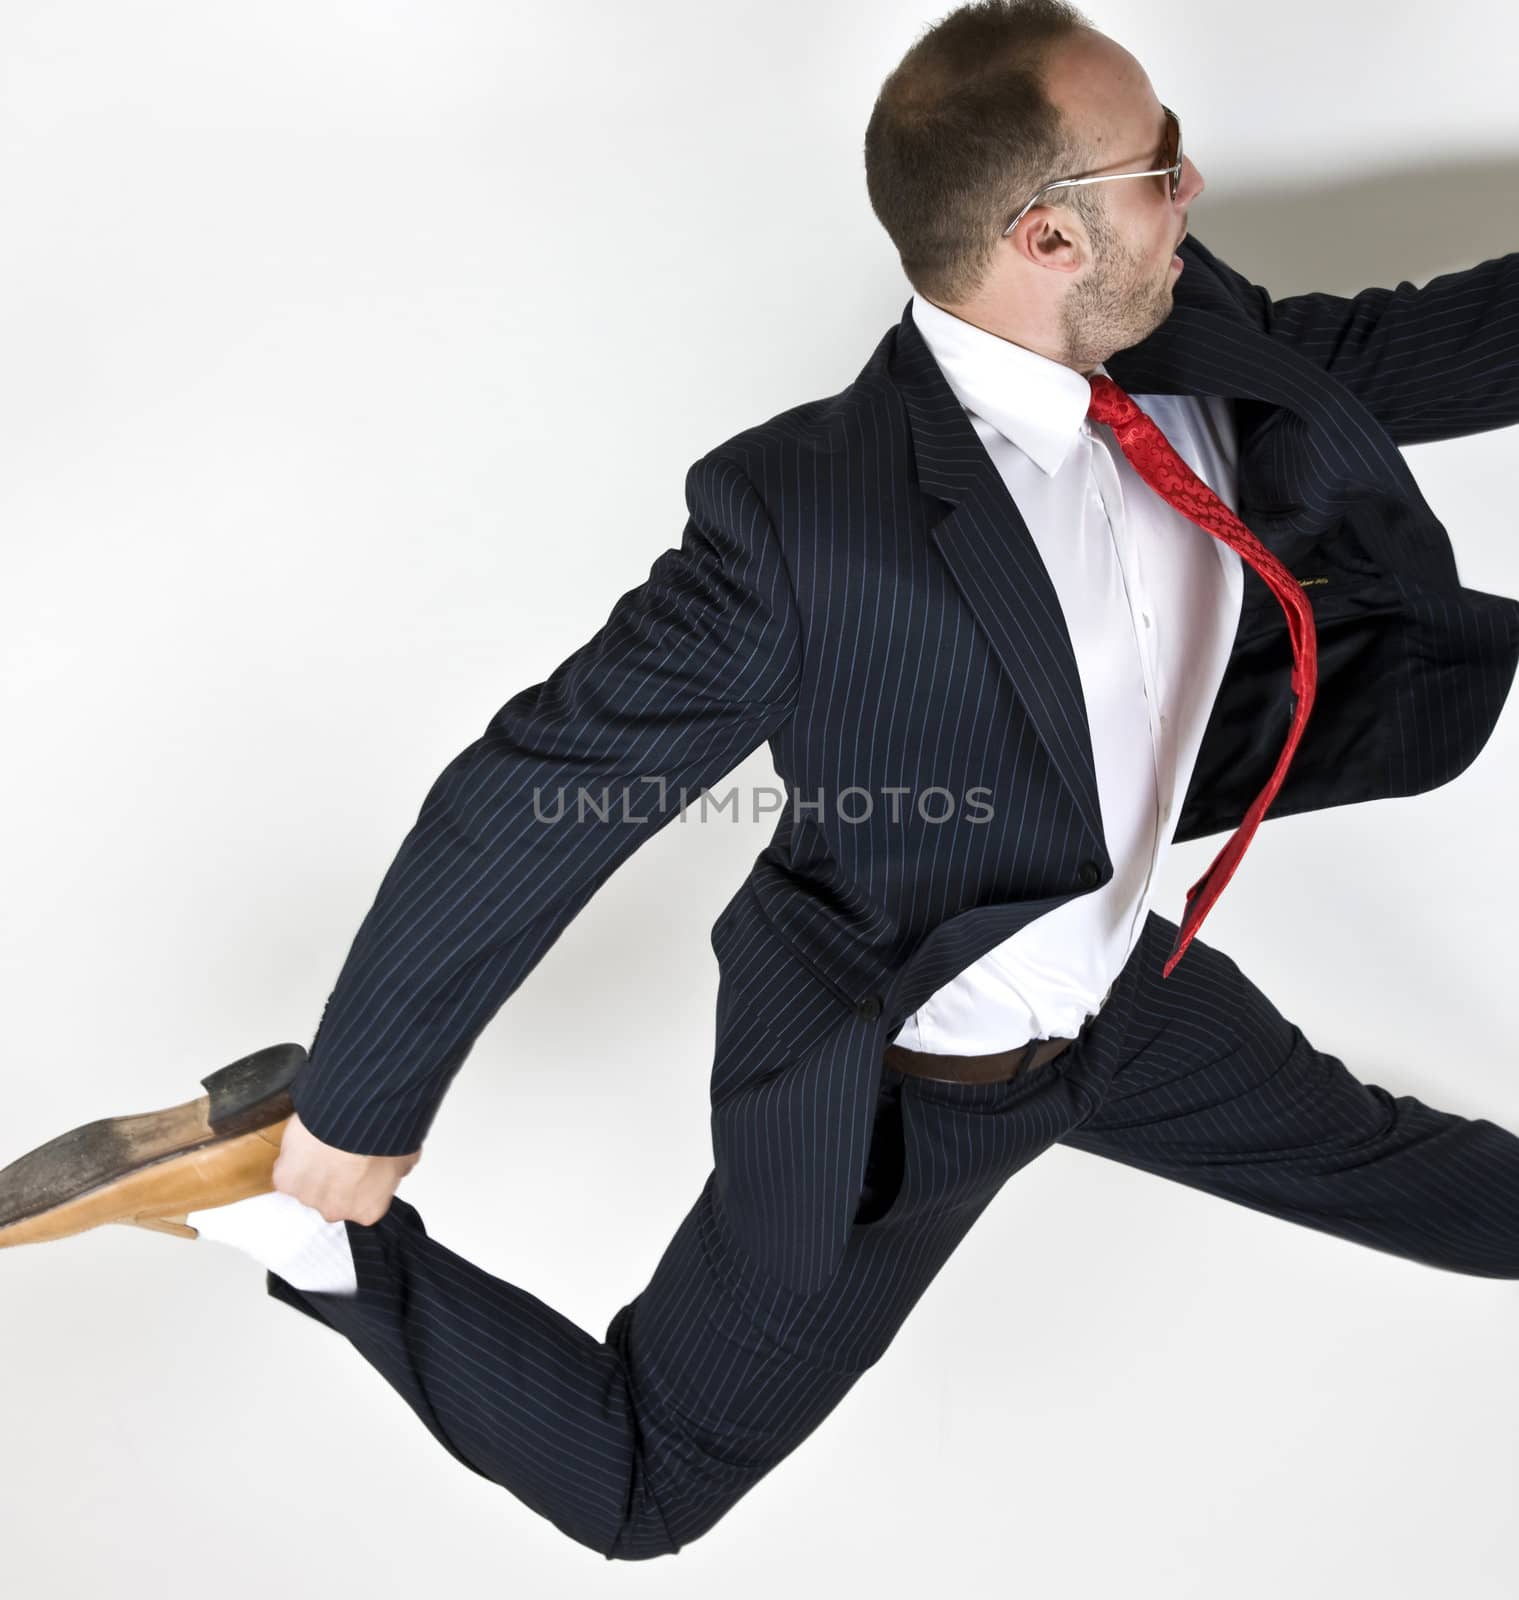 jumping male on isolated background
